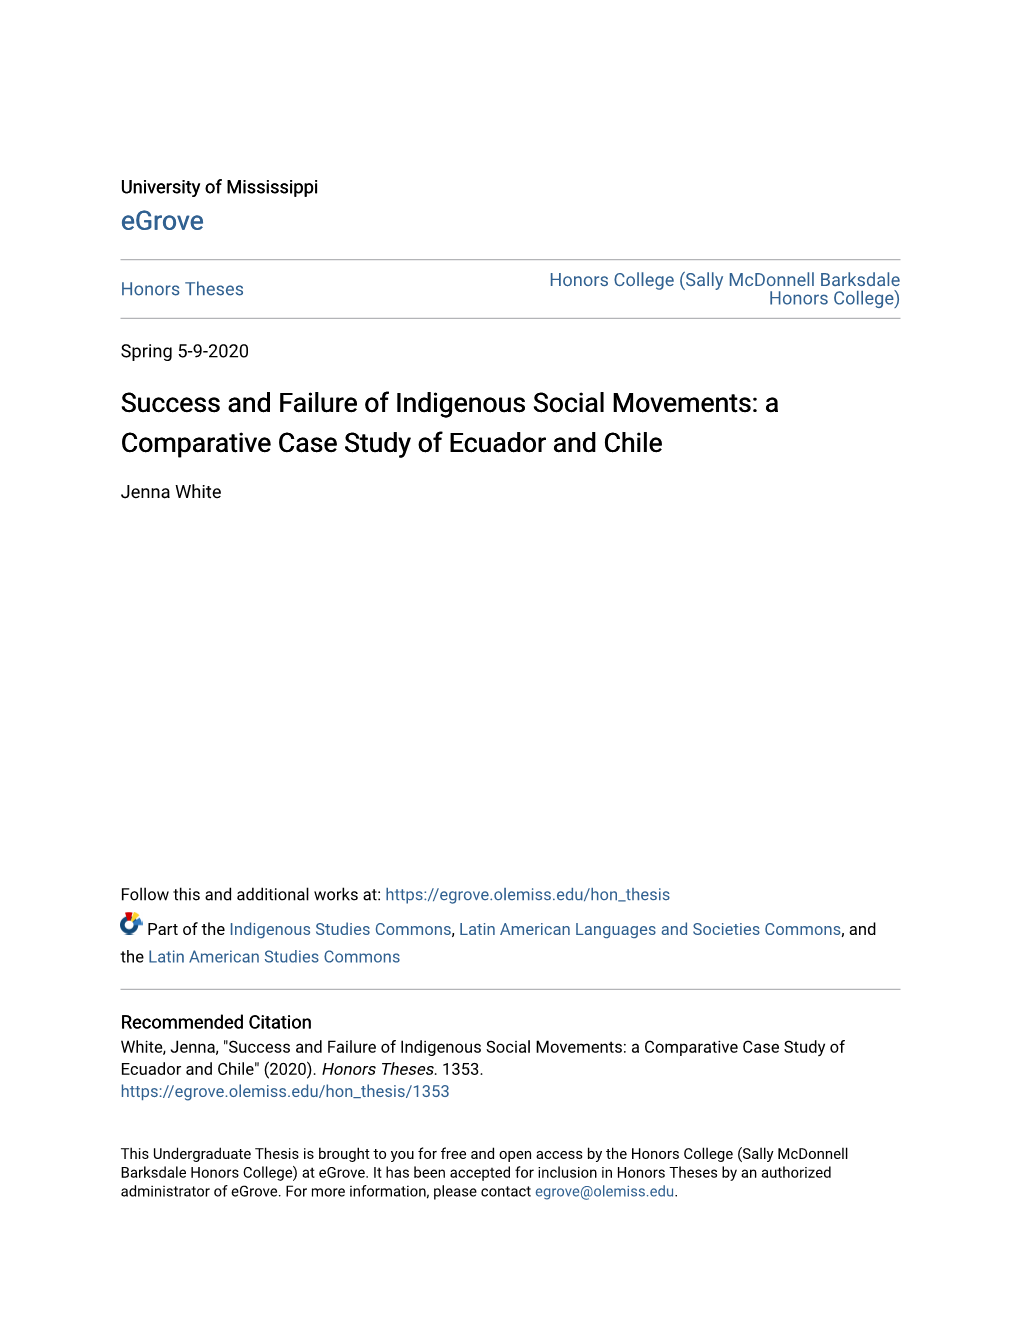 Success and Failure of Indigenous Social Movements: a Comparative Case Study of Ecuador and Chile